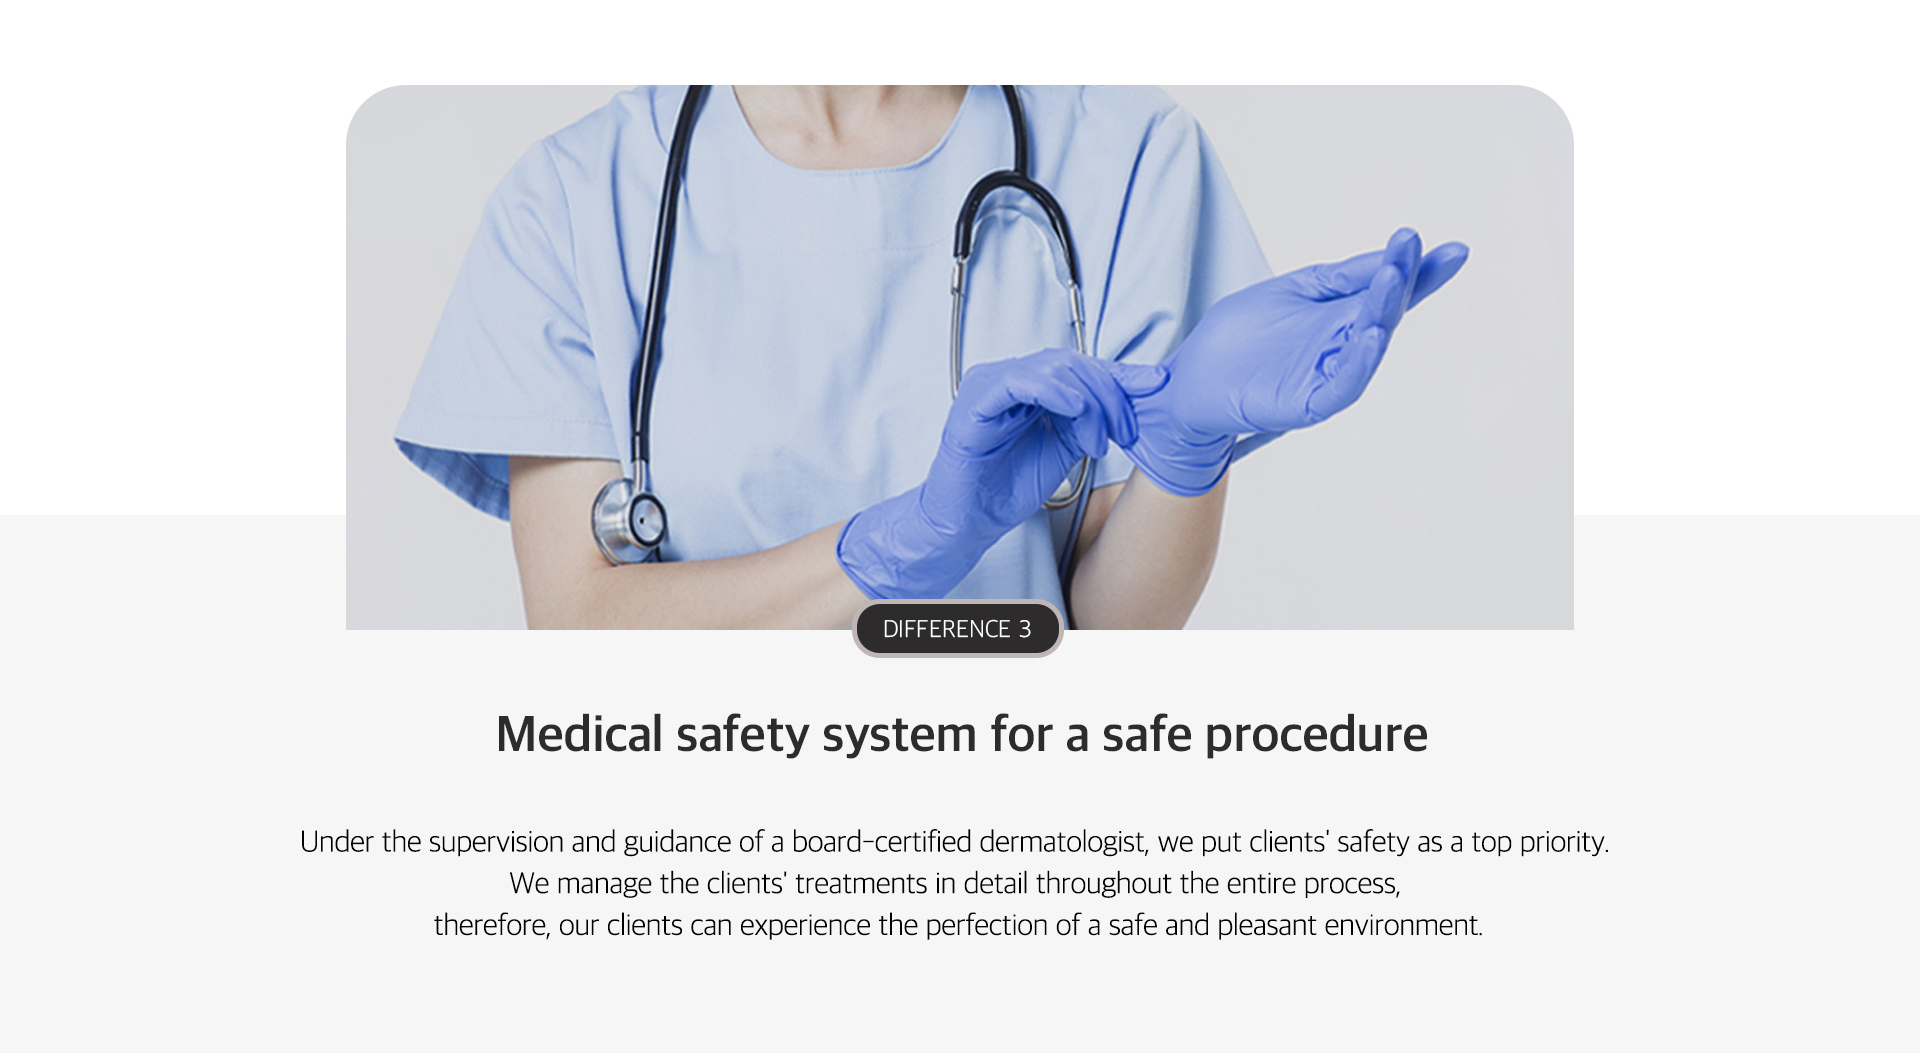 [DIFFERENCE 3] Medical safety system for a safe procedure